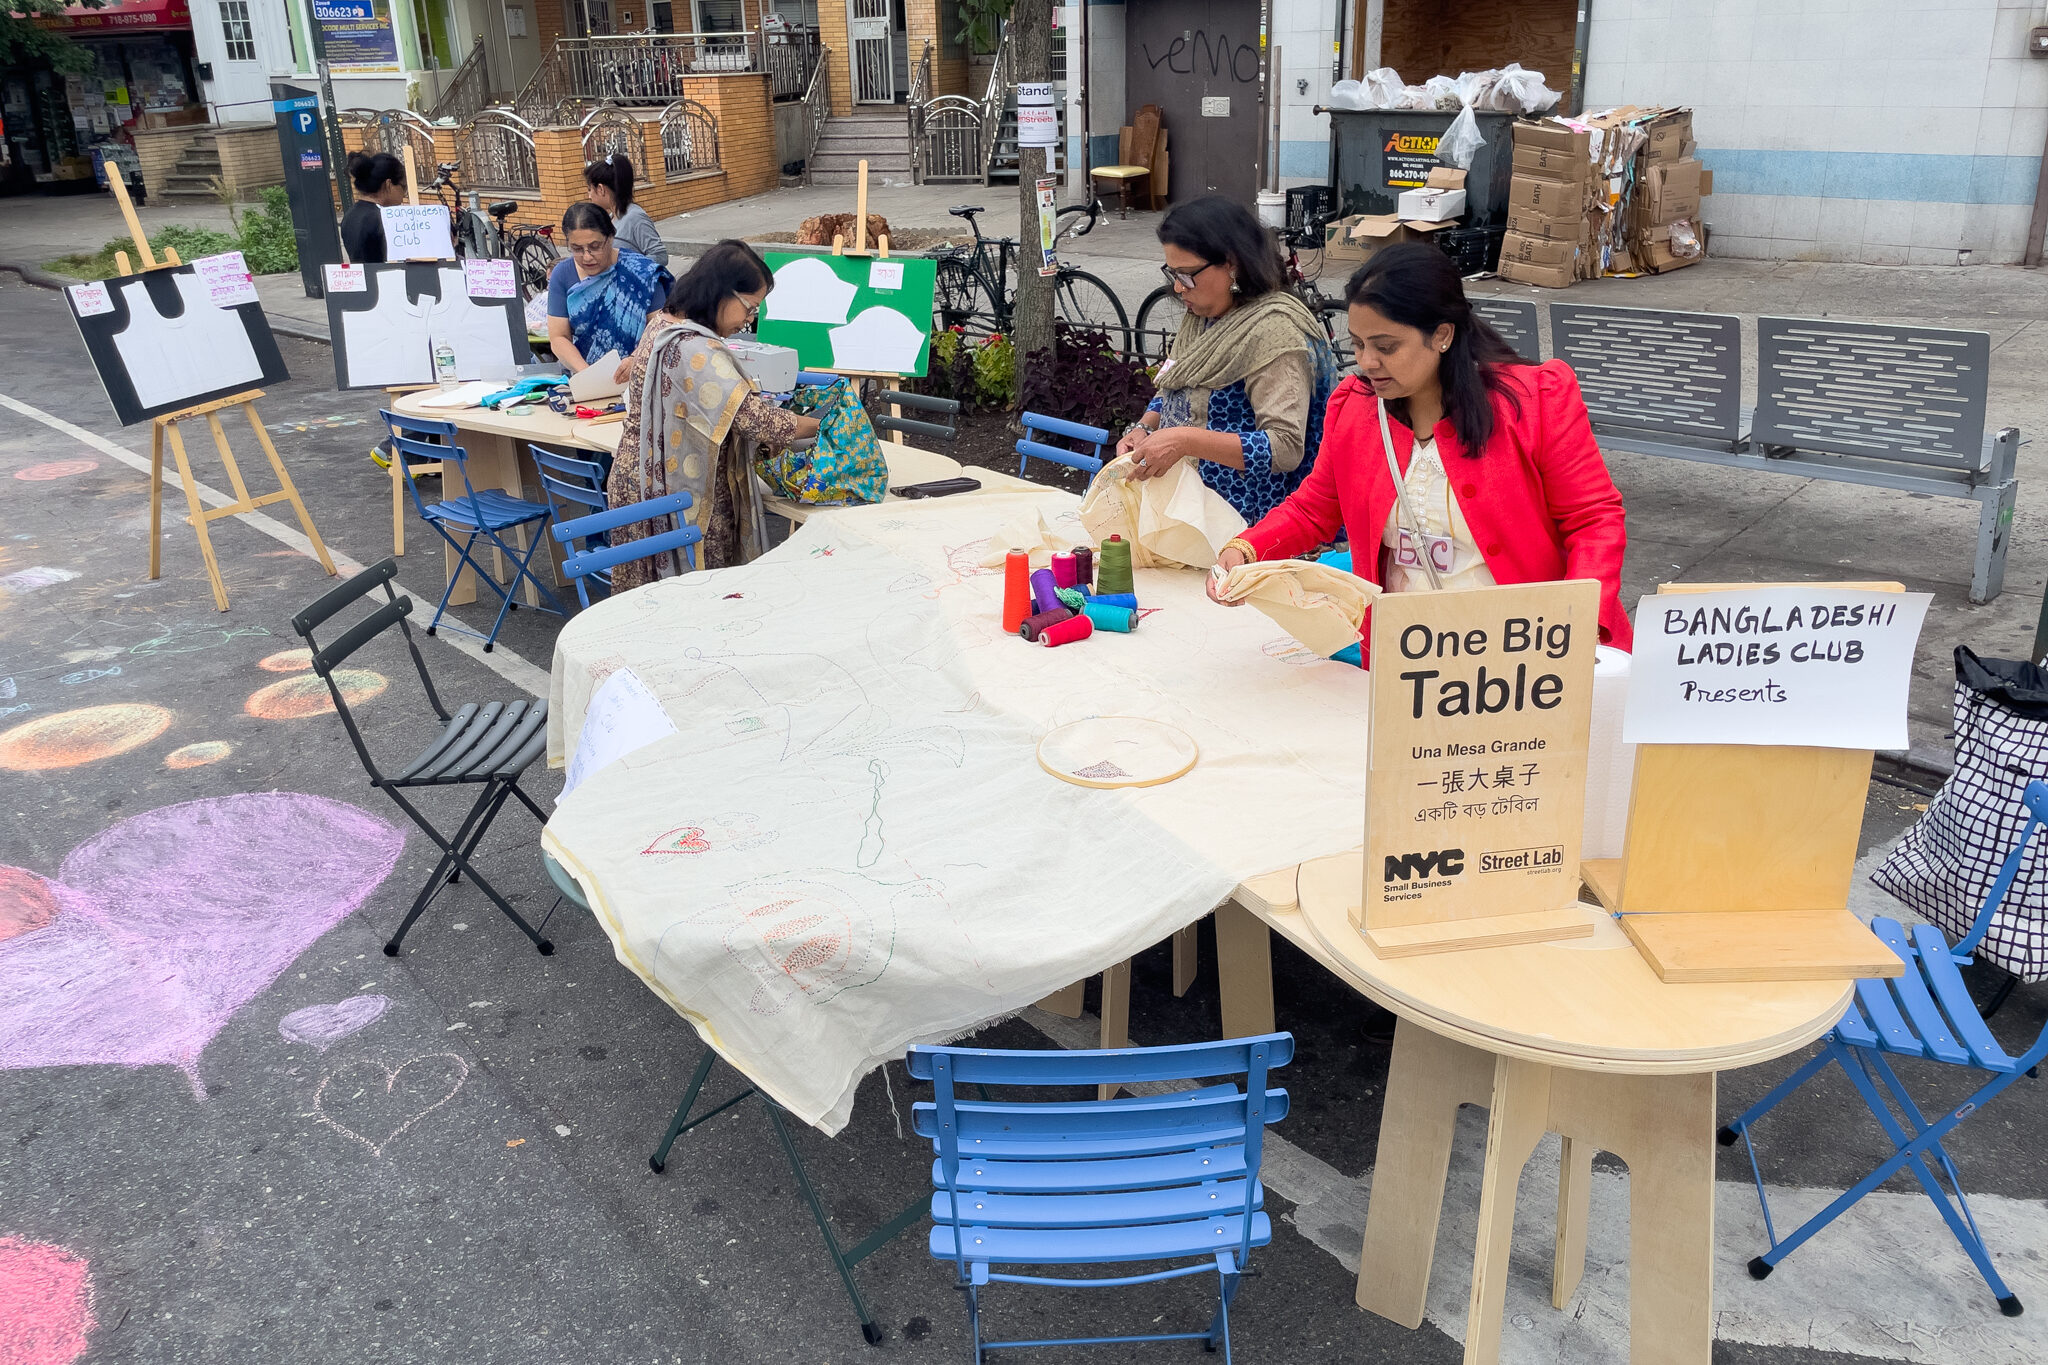 A group of people learning how to embroider on one big table on the street of NYC.